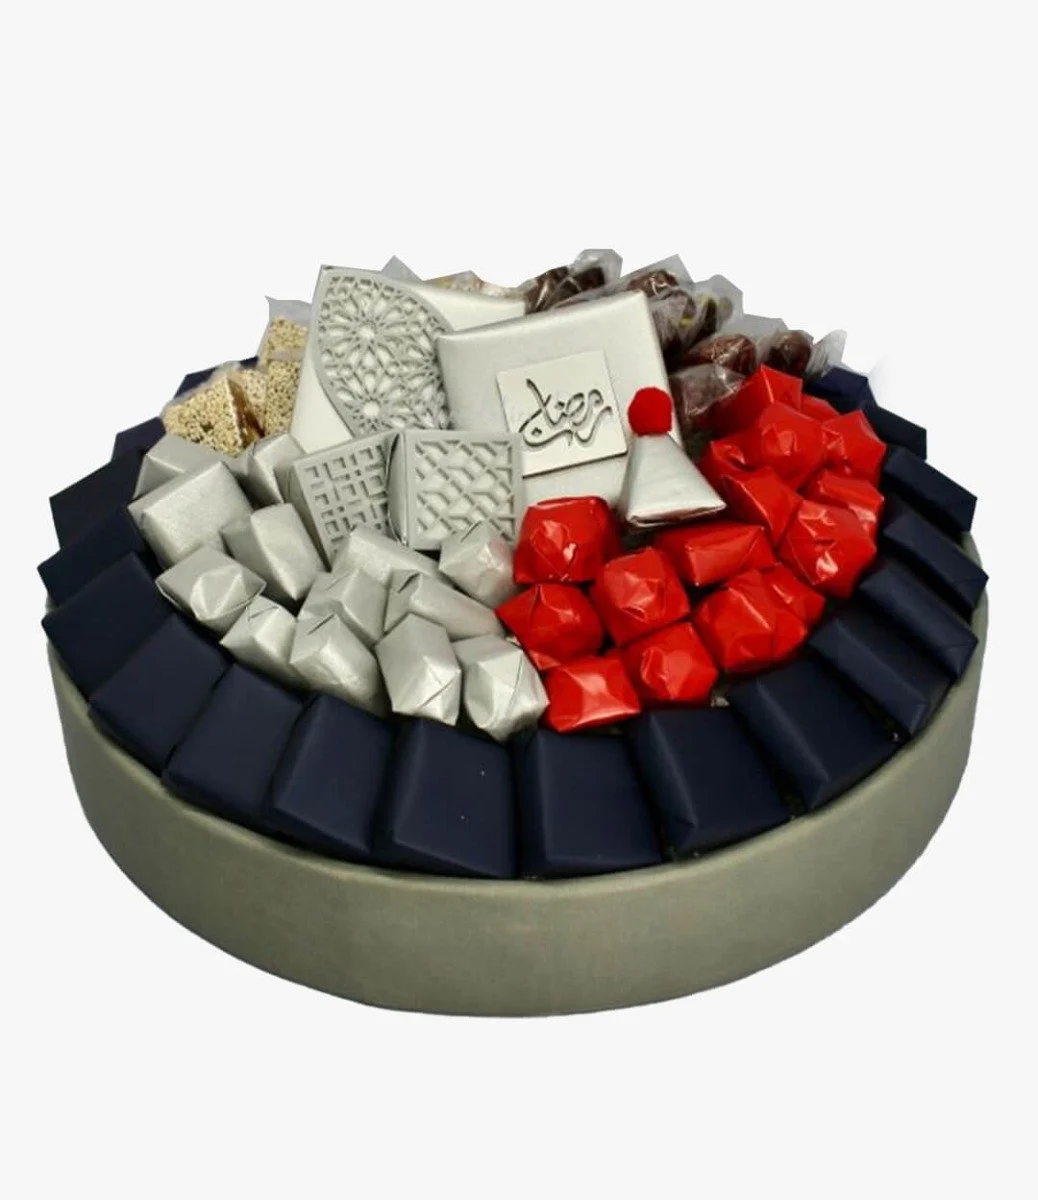 Ramadan Luxury Leather Chocolate Dates Delights Tray (Red & White) by Le Chocolatier Dubai